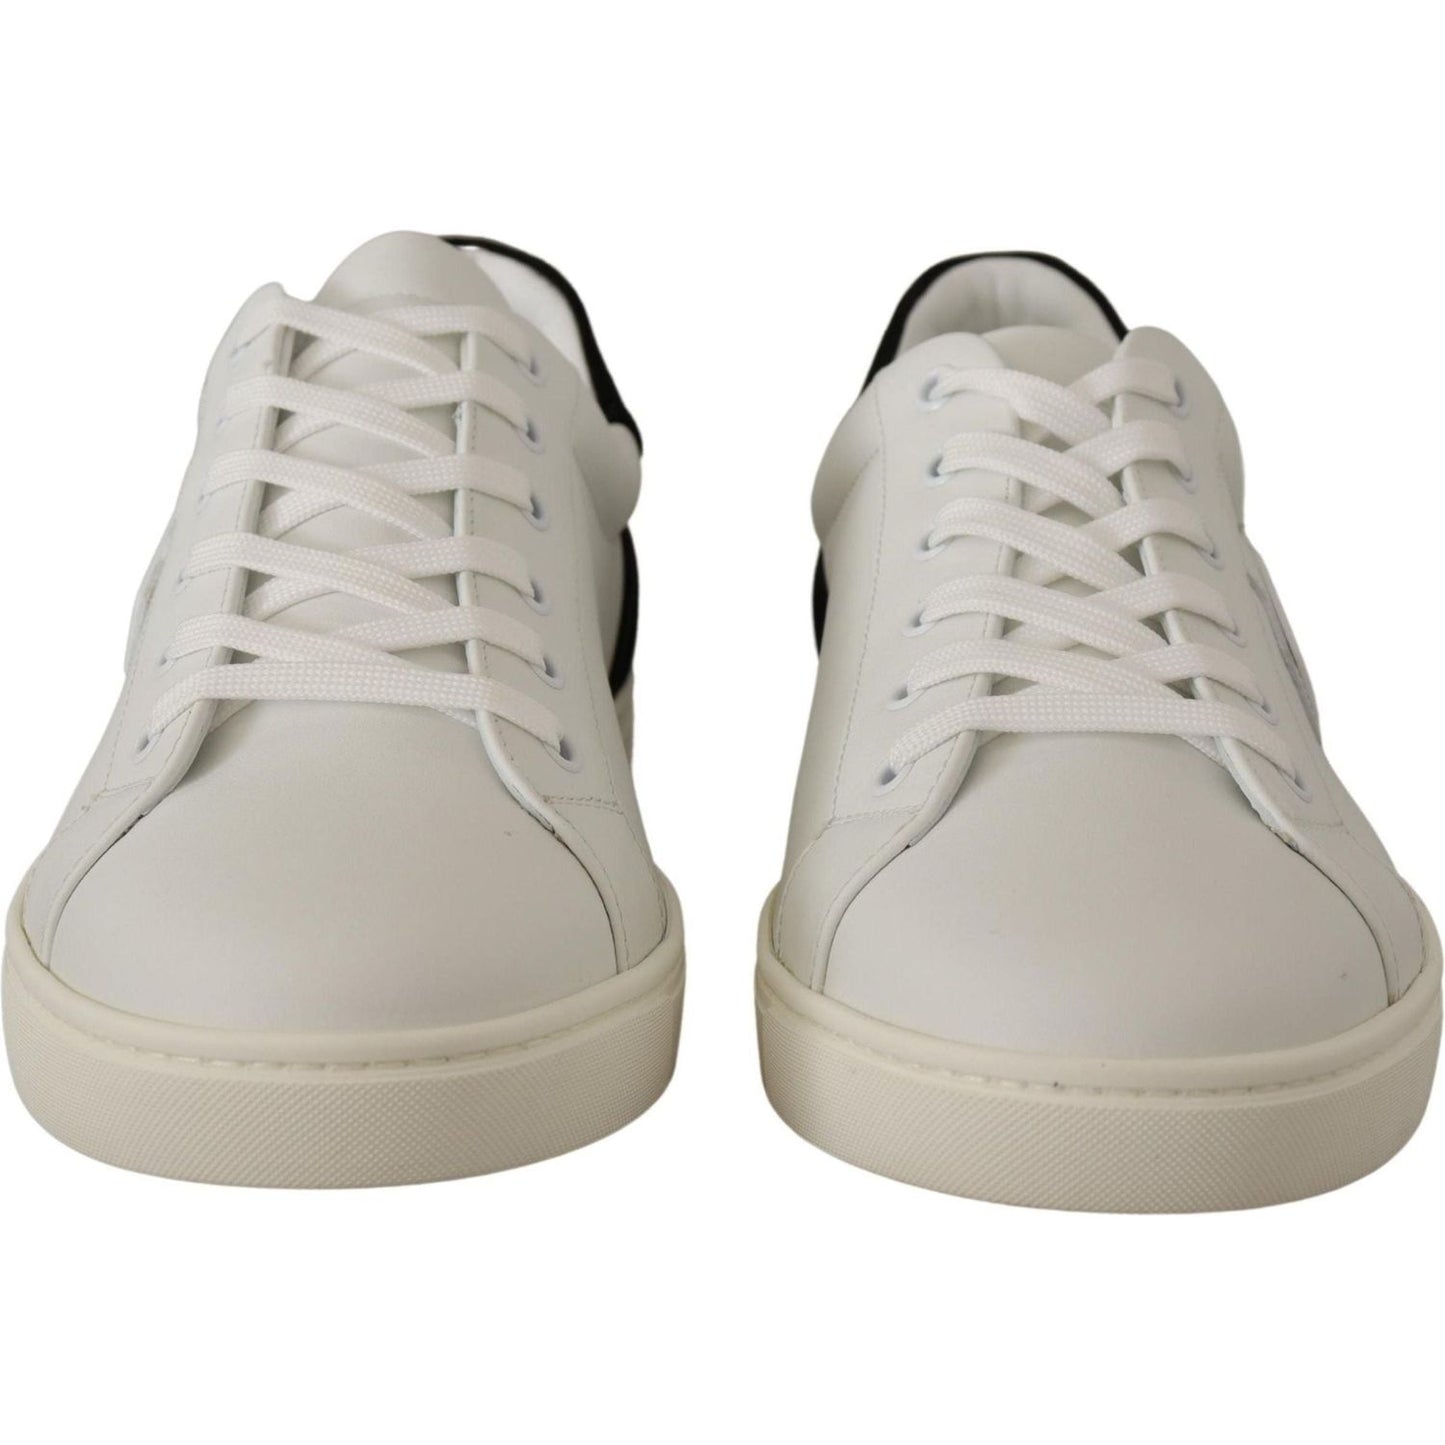 Dolce & Gabbana Exclusive White Sneakers for Men white-suede-leather-low-tops-sneakers-1